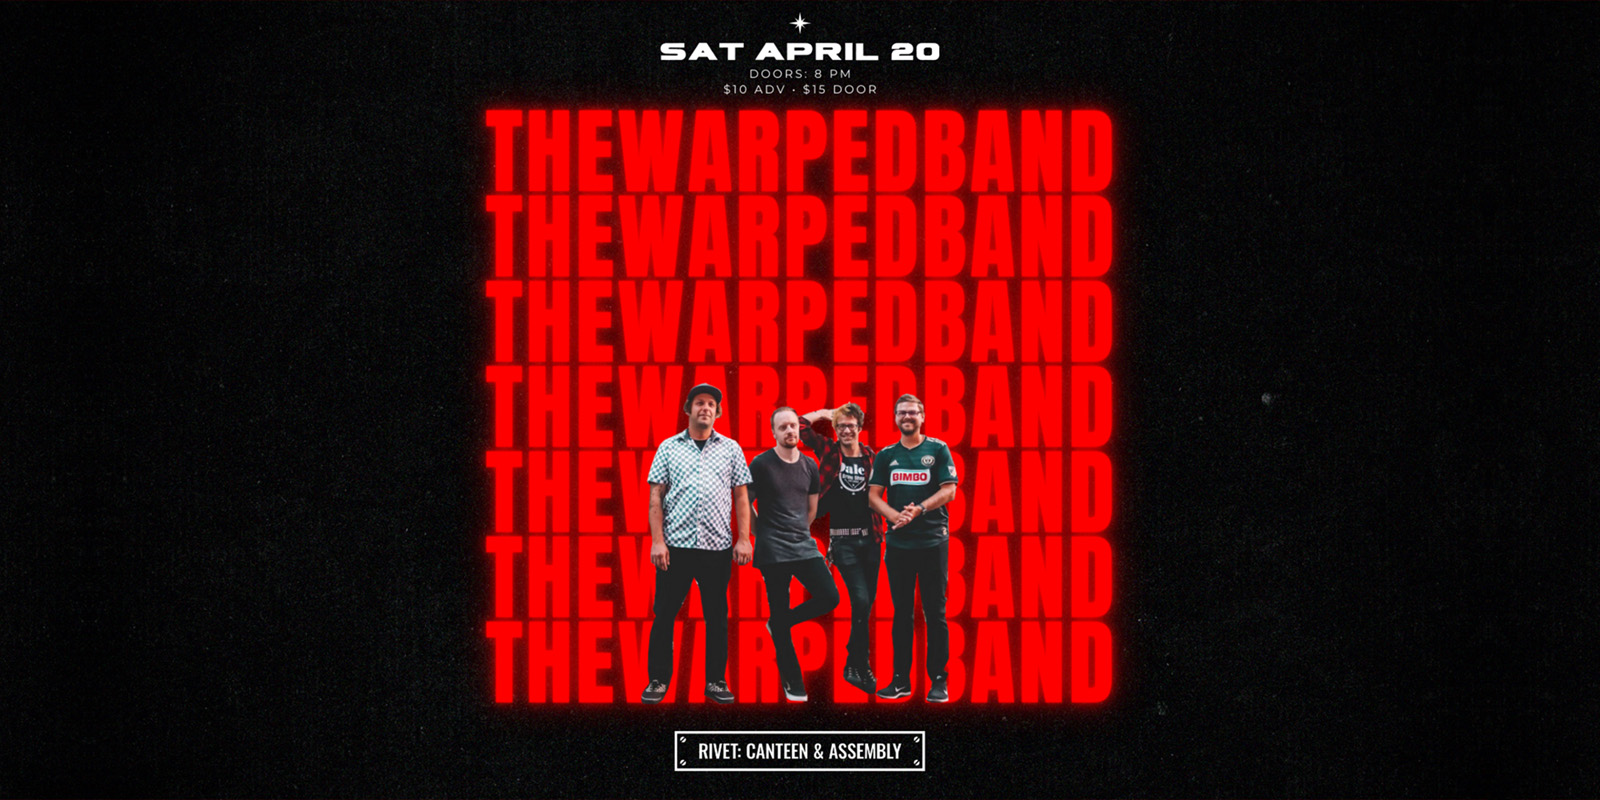 The Warped Band concert at Rivet: Canteen & Assembly on Saturday, April 20th. Be there!